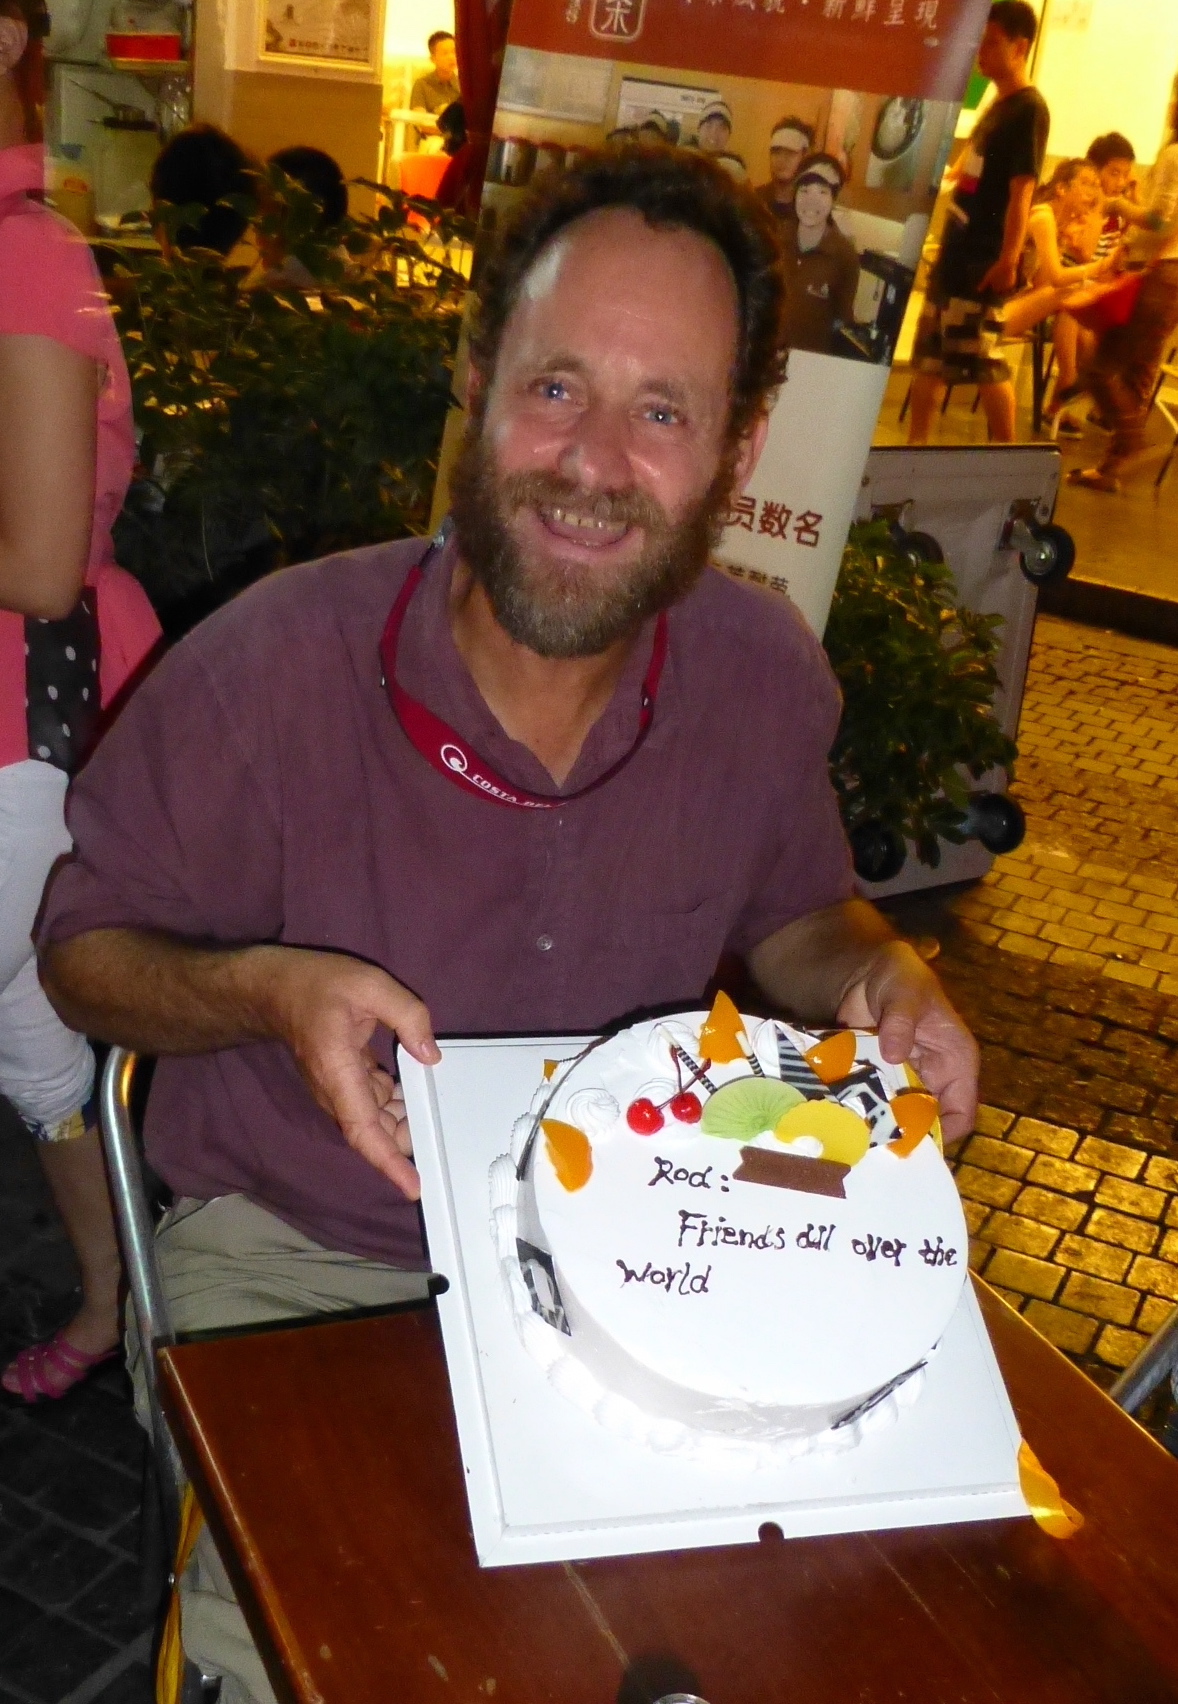 Rod with a Birthday cake in honour of his 50th Birthday at the 13th International Thermochronology Conference in Guilin China in August 2012 – the inscription on the cake says it all about how he was and regarded by the whole of that community. Image: Andy Gleadow.